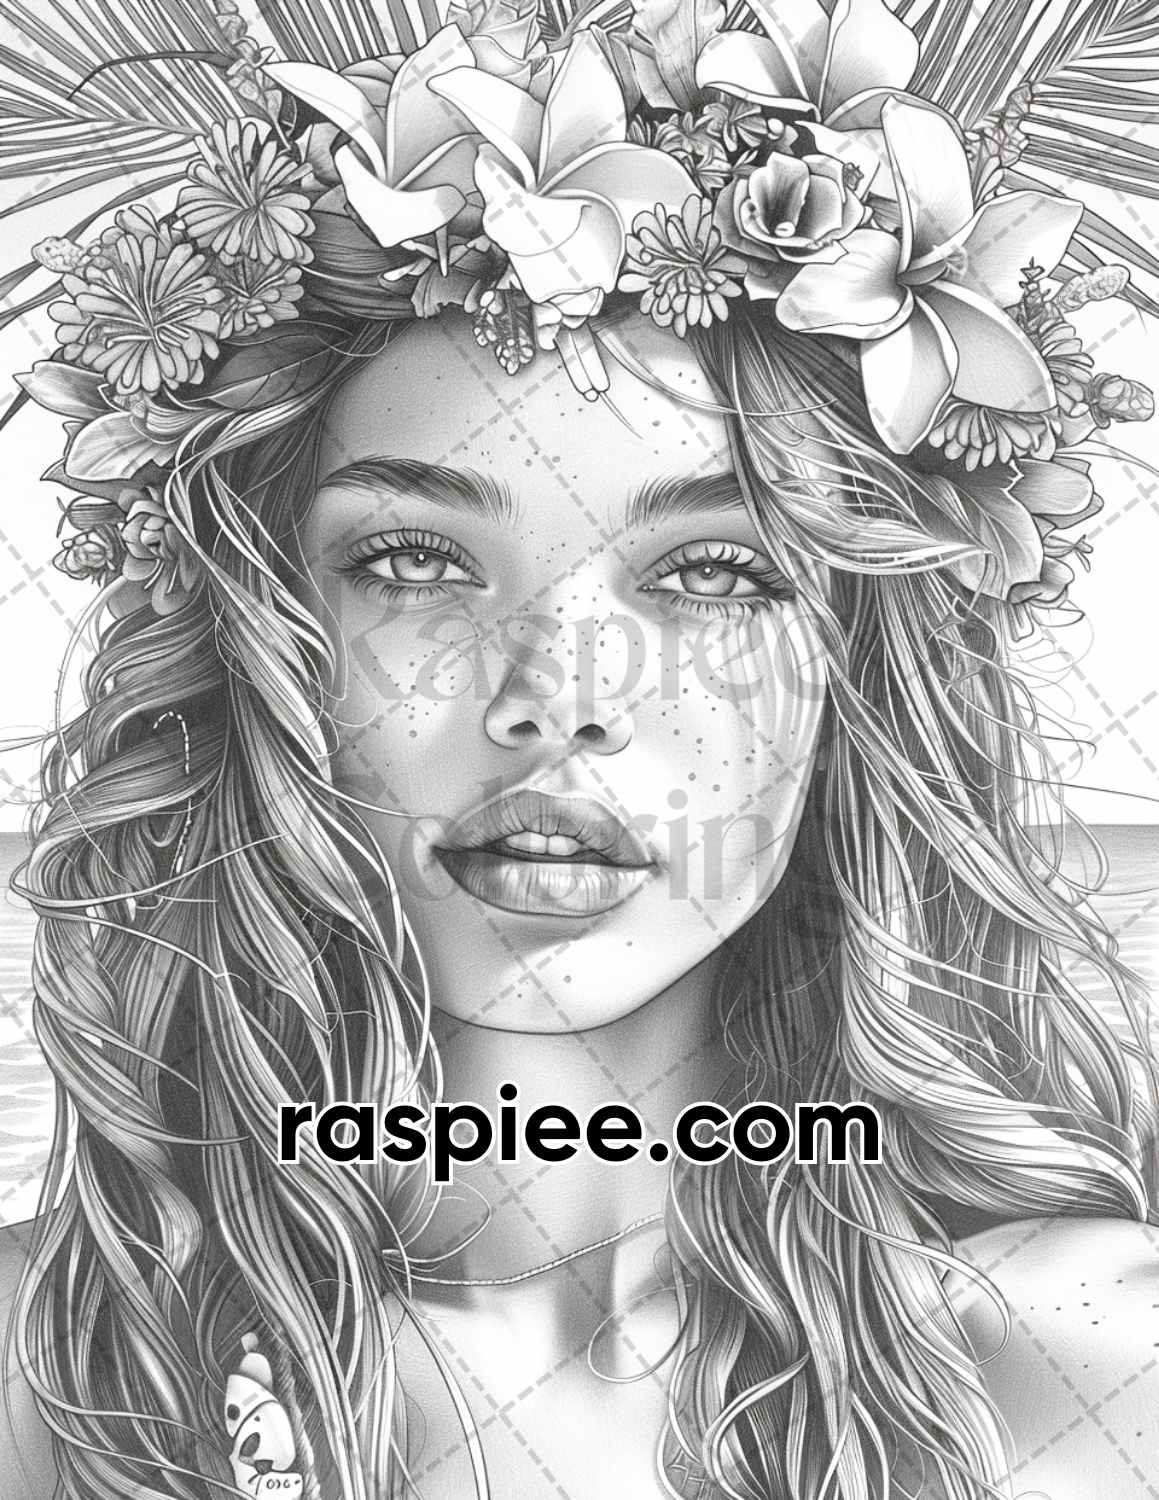 adult coloring pages, adult coloring sheets, adult coloring book pdf, adult coloring book printable, grayscale coloring pages, grayscale coloring books, grayscale illustration, portrait adult coloring pages, portrait adult coloring book, Beautiful Tropical Girls Grayscale Adult Coloring Pages